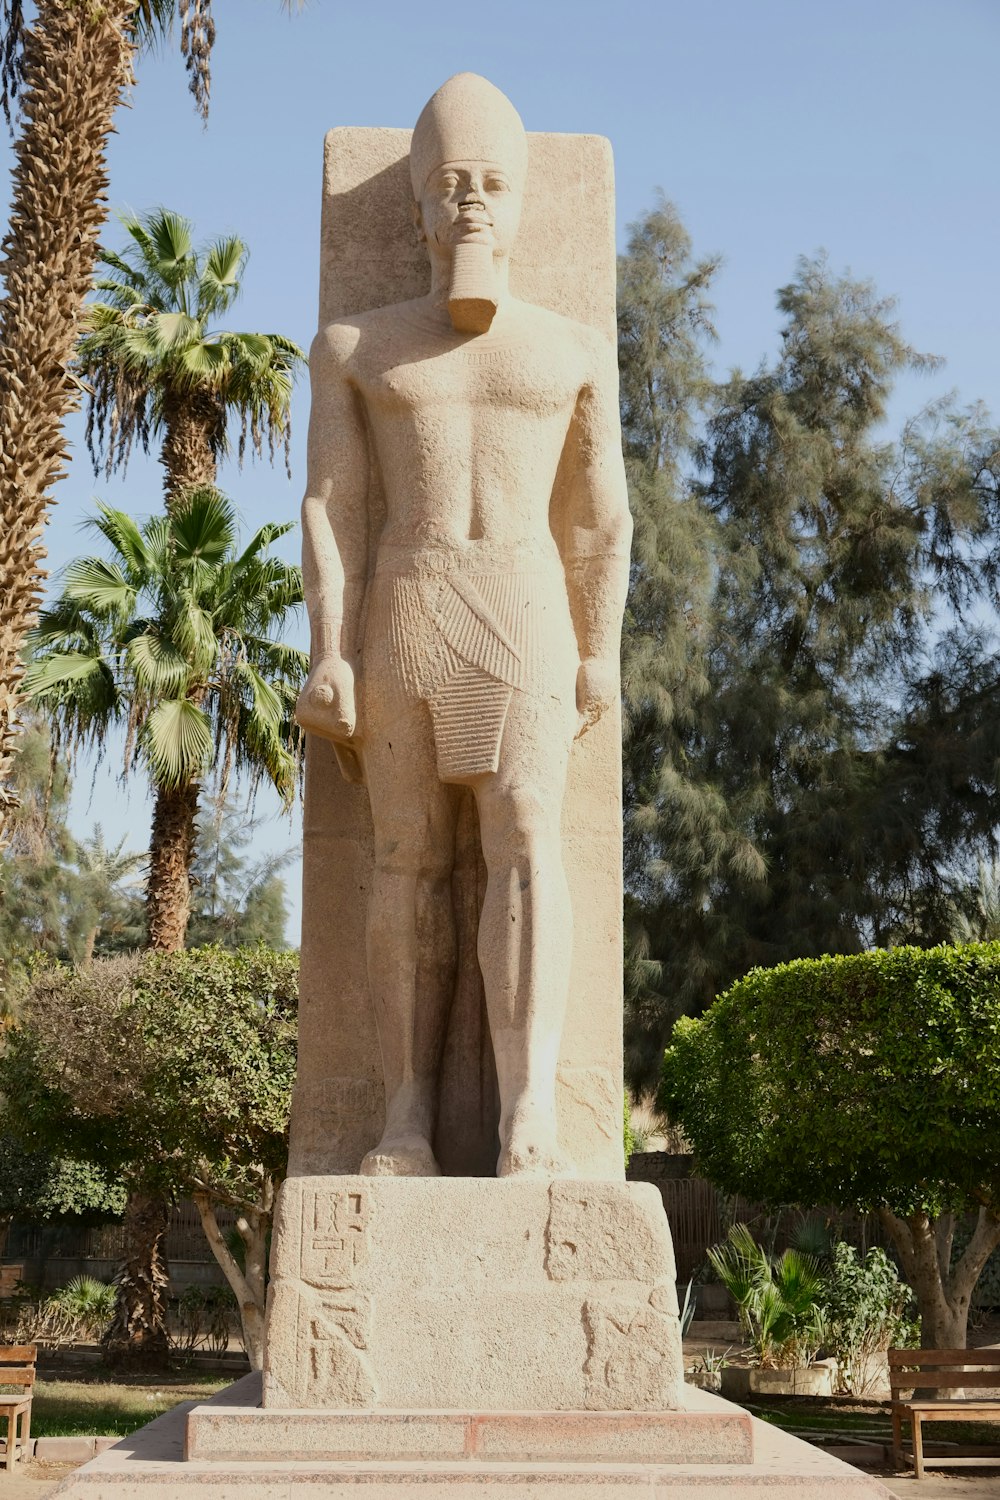 a statue of a man standing next to a palm tree